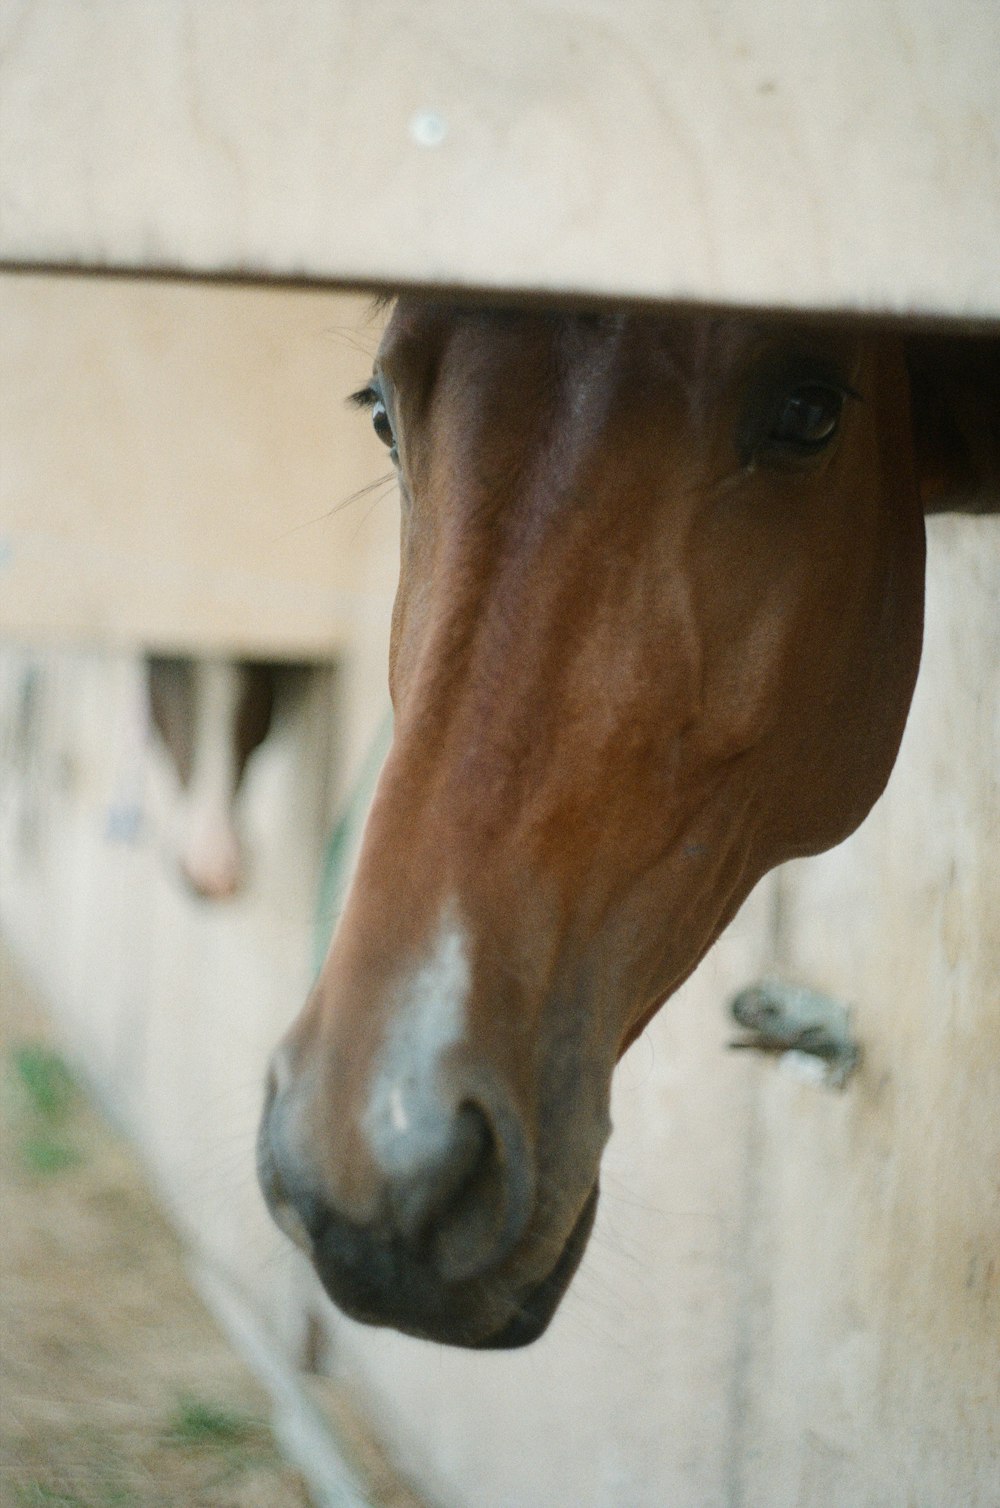 brown horse in cage during daytime